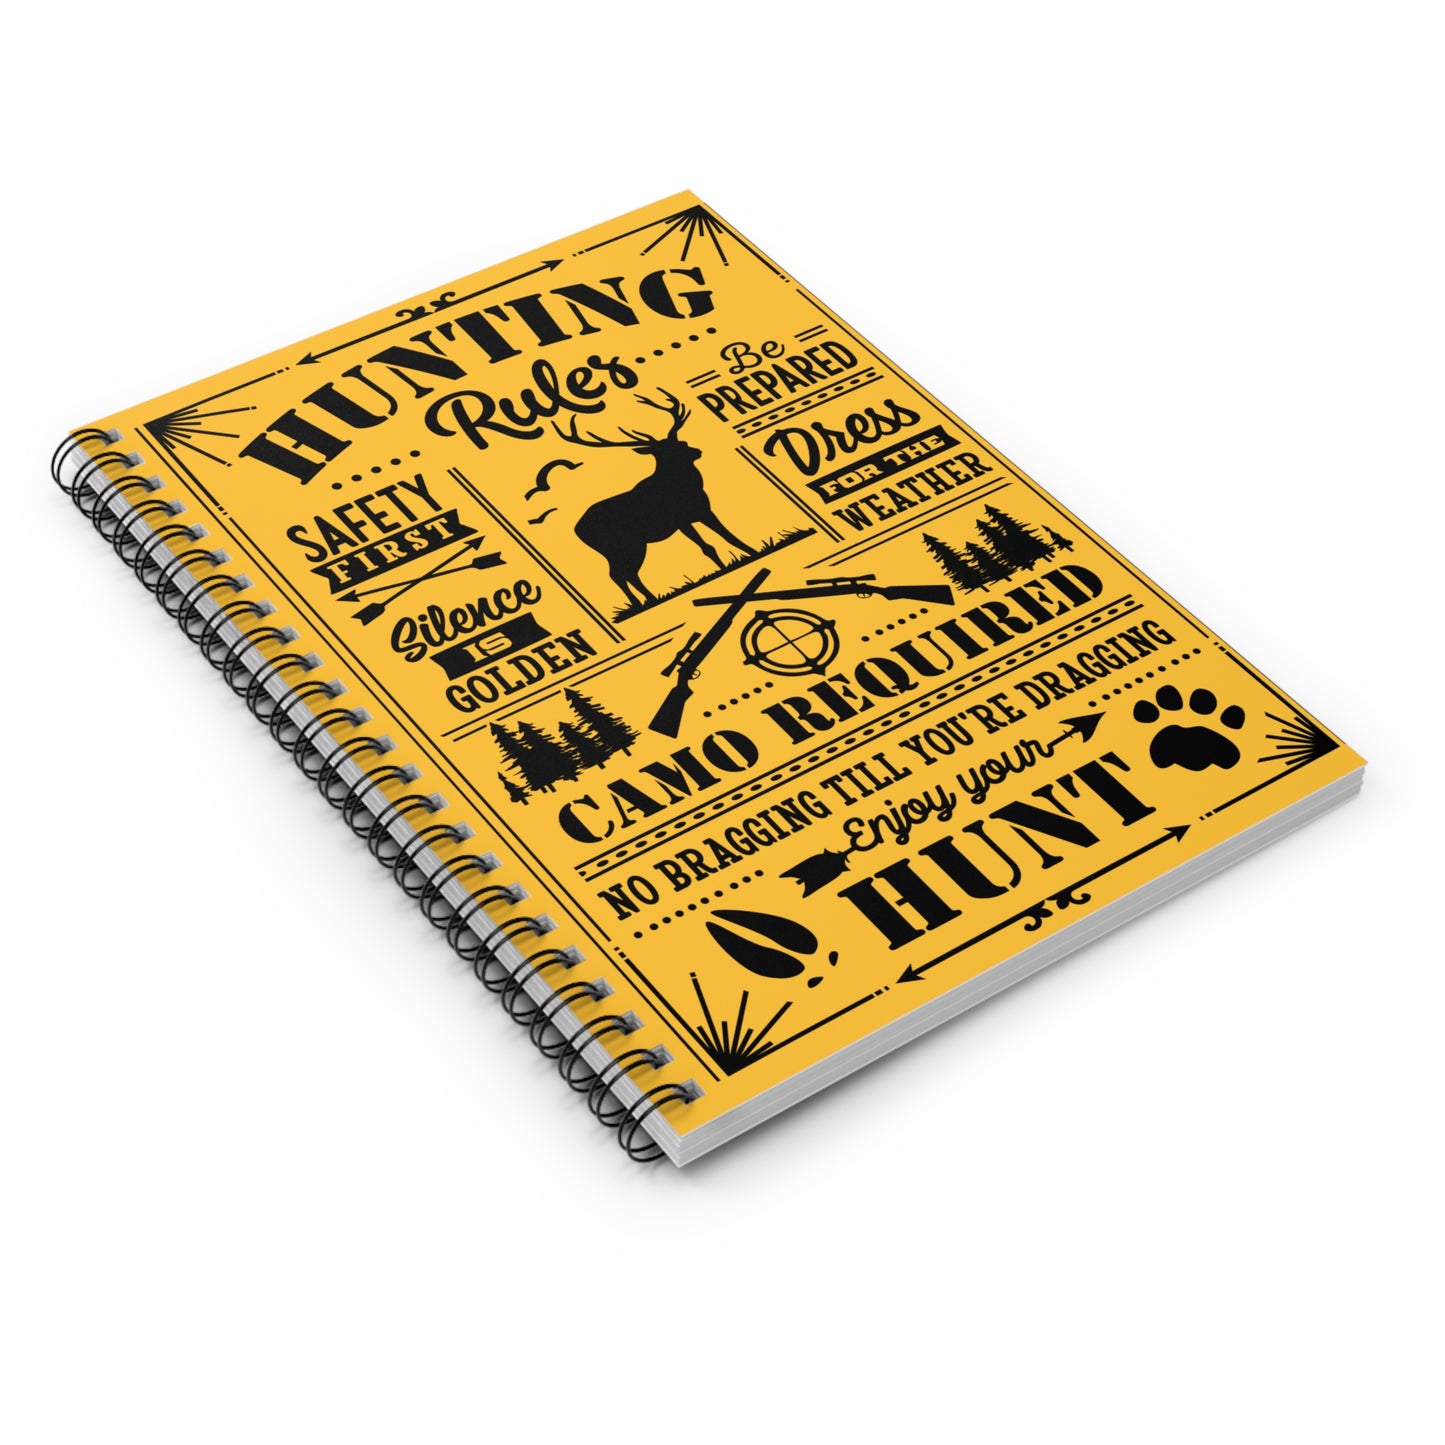 Hunting Rules: Spiral Notebook - Log Books - Journals - Diaries - and More Custom Printed by TheGlassyLass.com